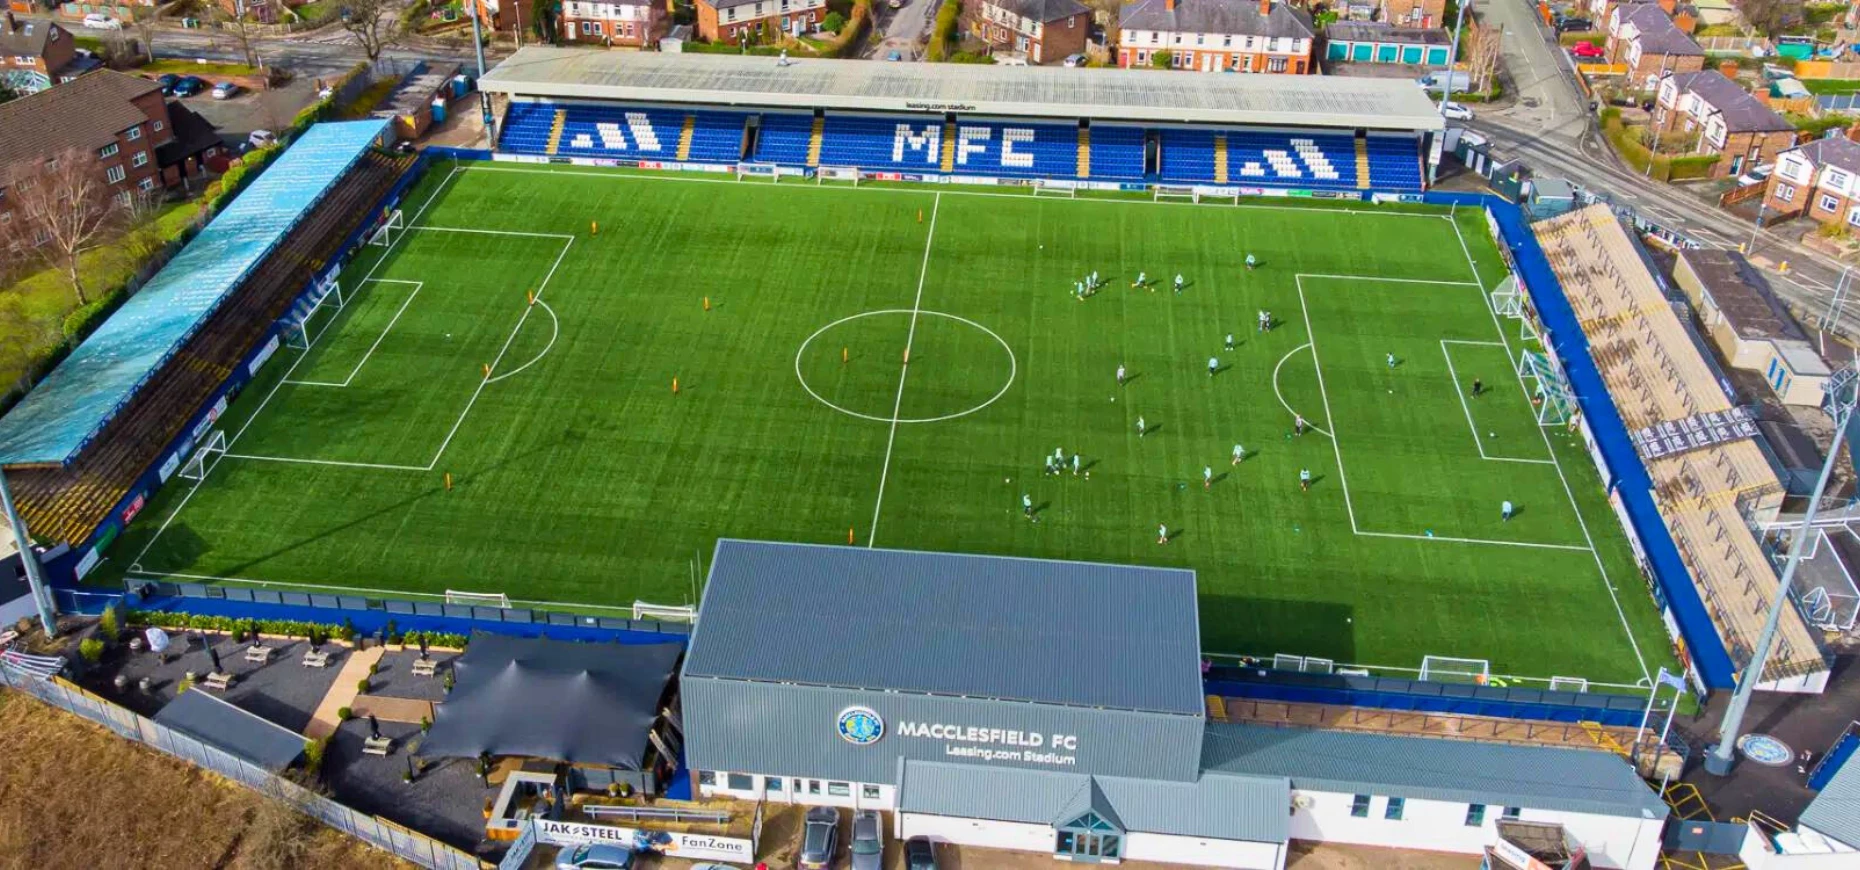 Macclesfield FC in partnership with Leasing.com